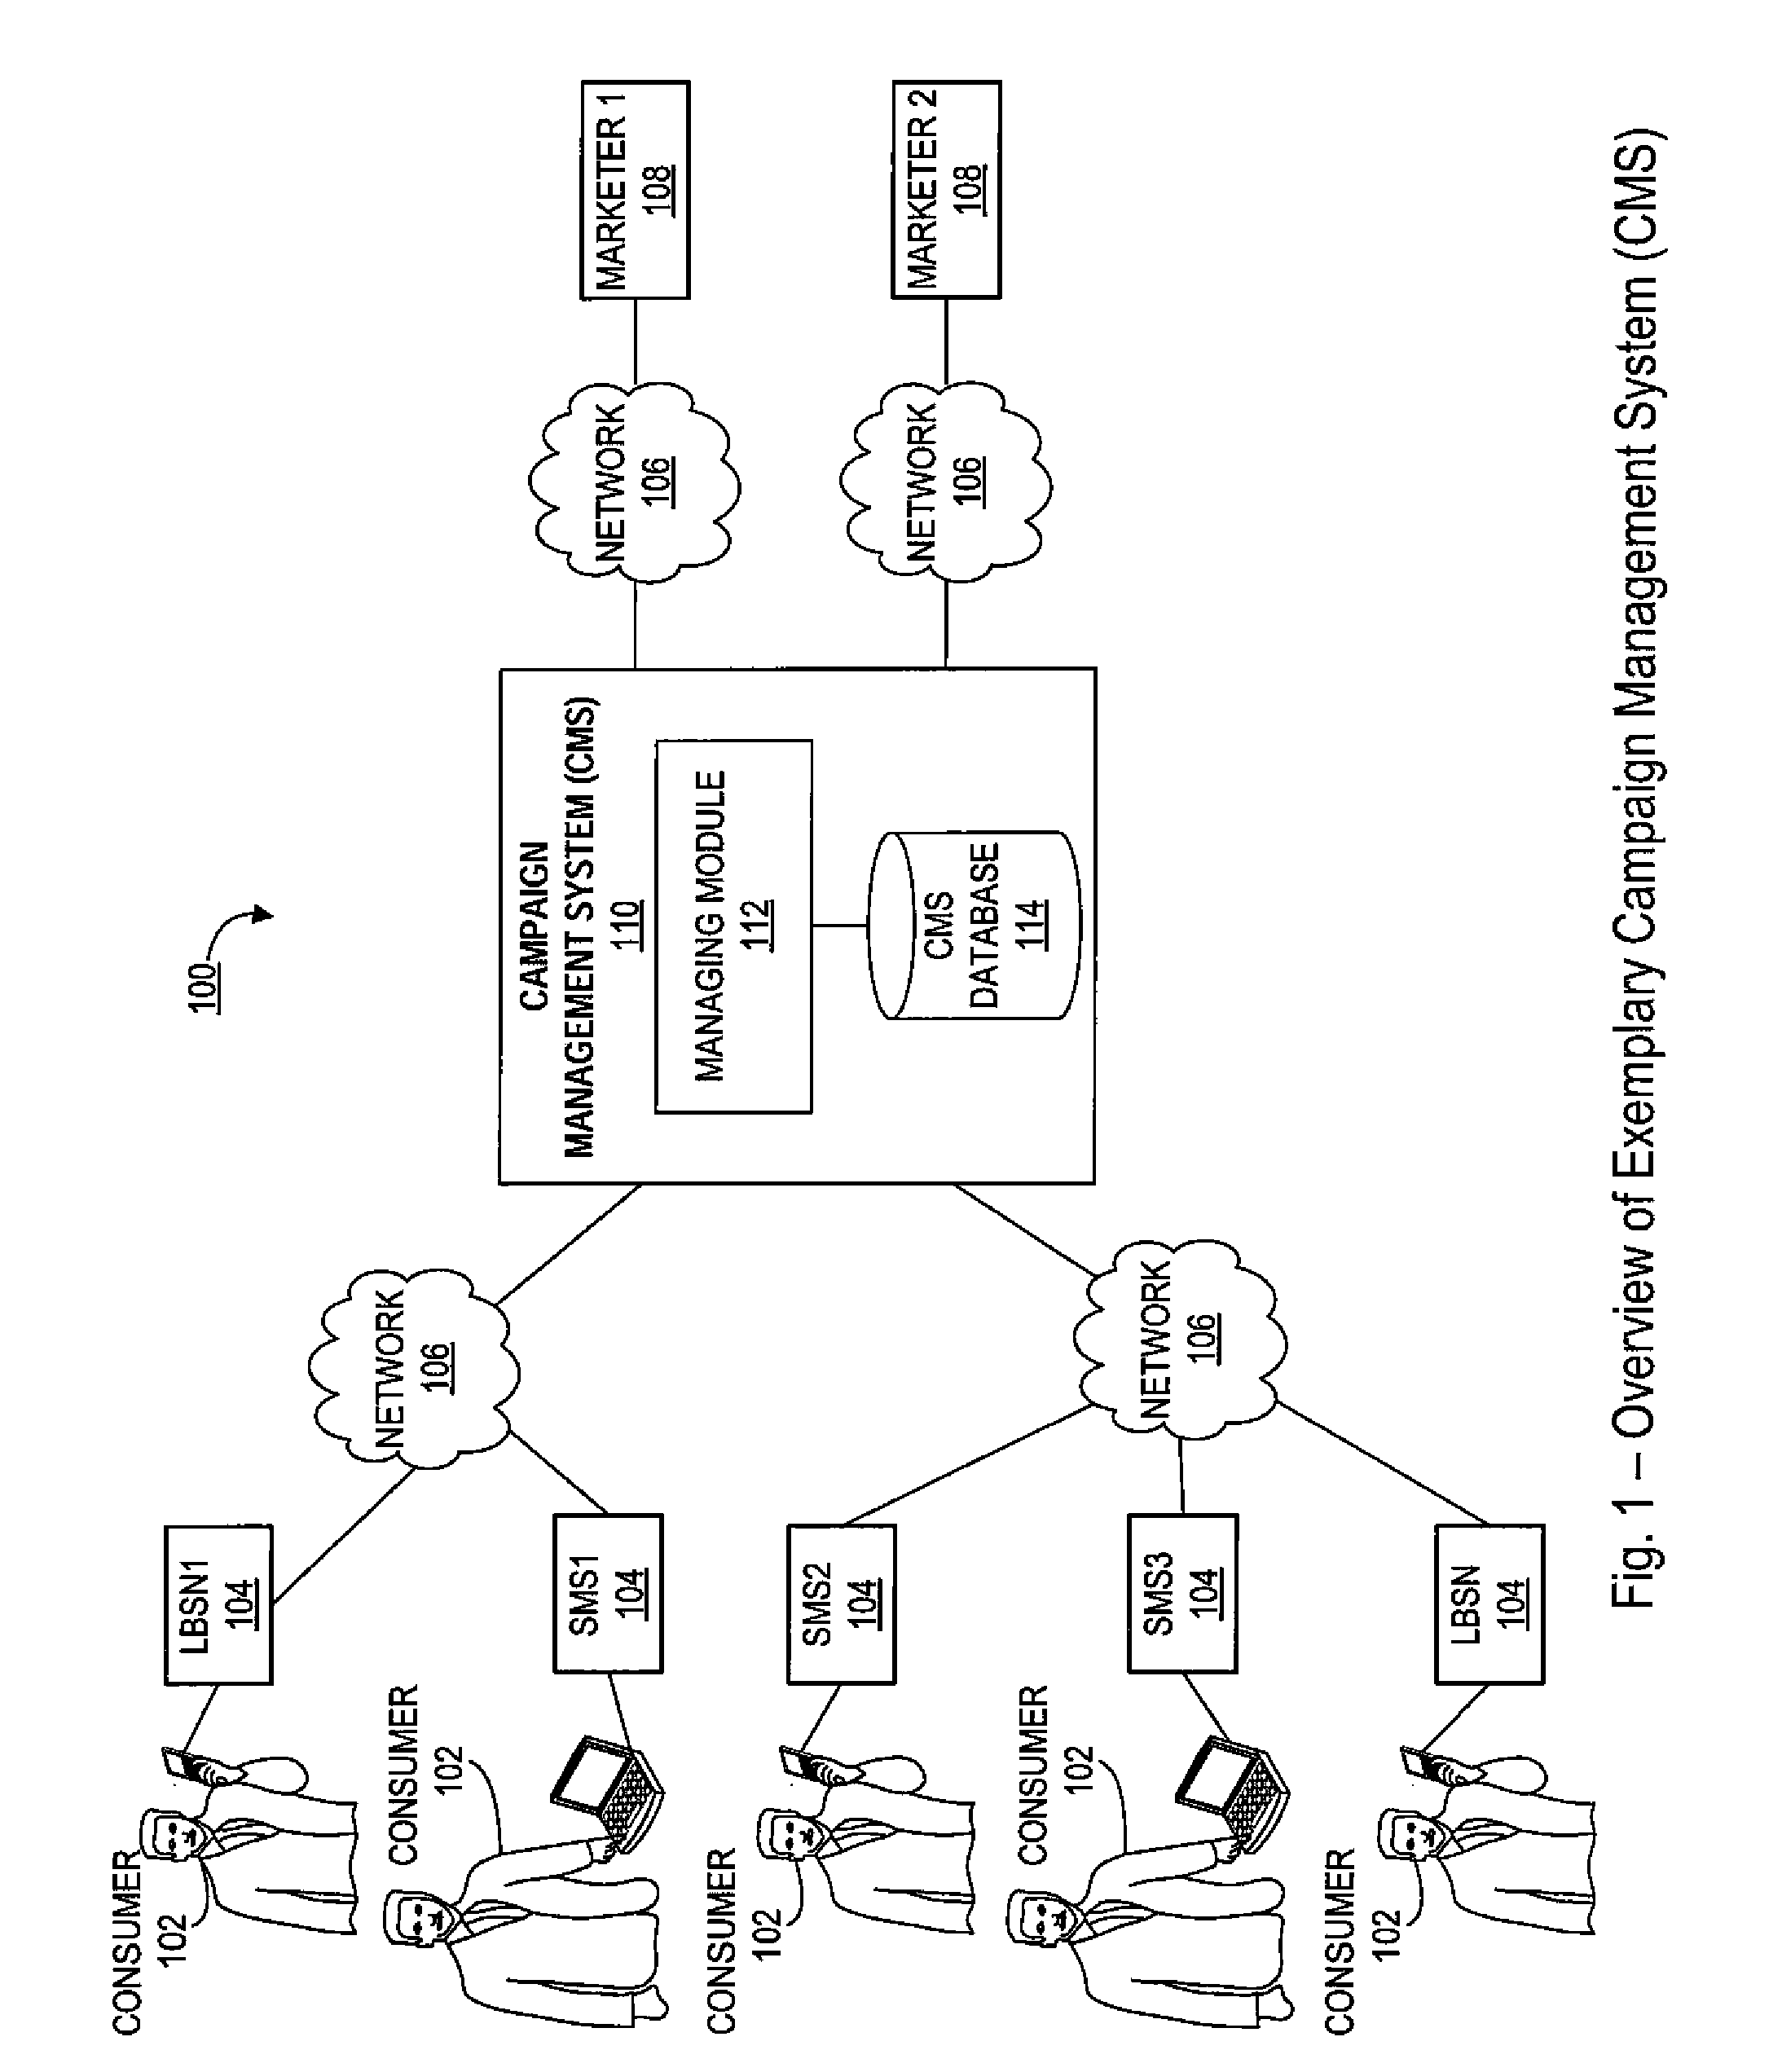 Systems and methods for delivering targeted content to a consumer's mobile device based on the consumer's physical location and social media memberships